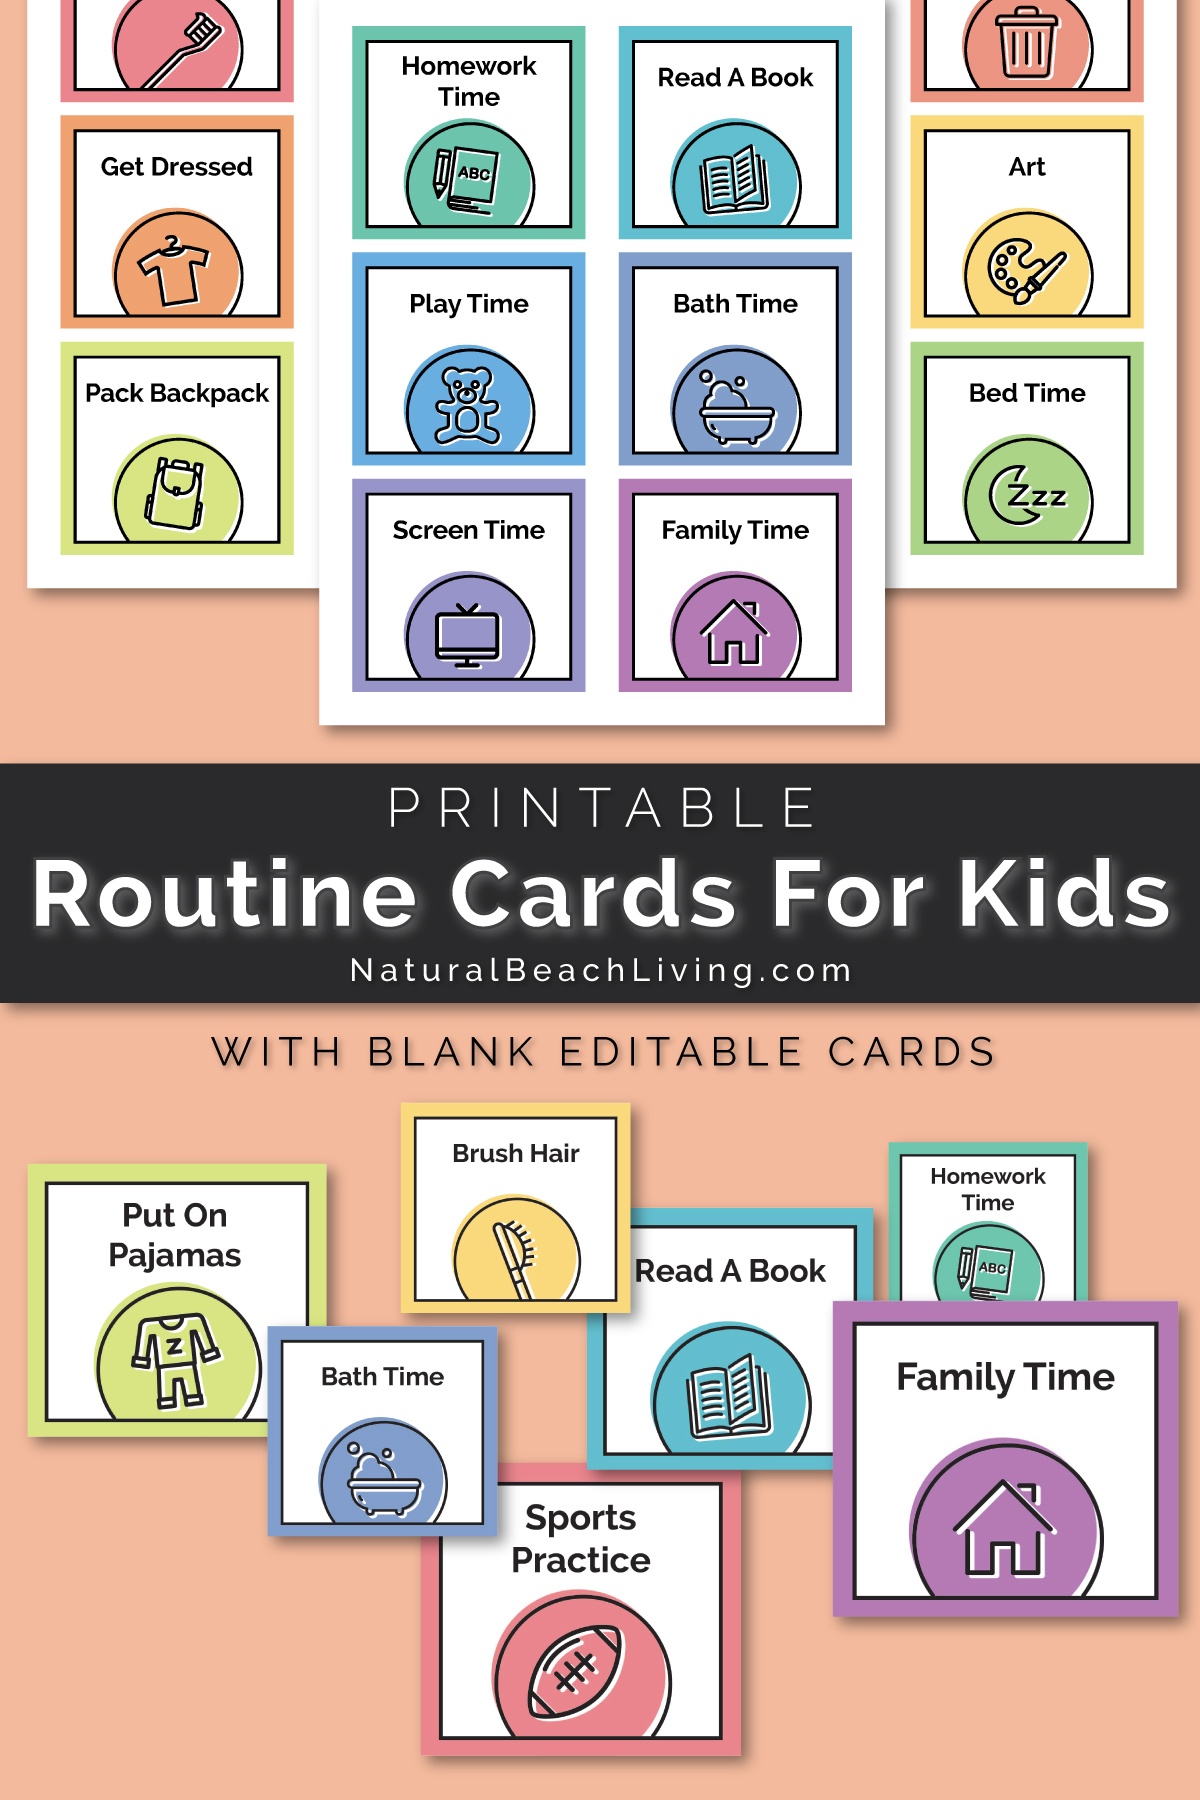 Visual Schedule - Free Printable Routine Cards - Natural Beach Living - Free Printable Schedule Cards For Preschool